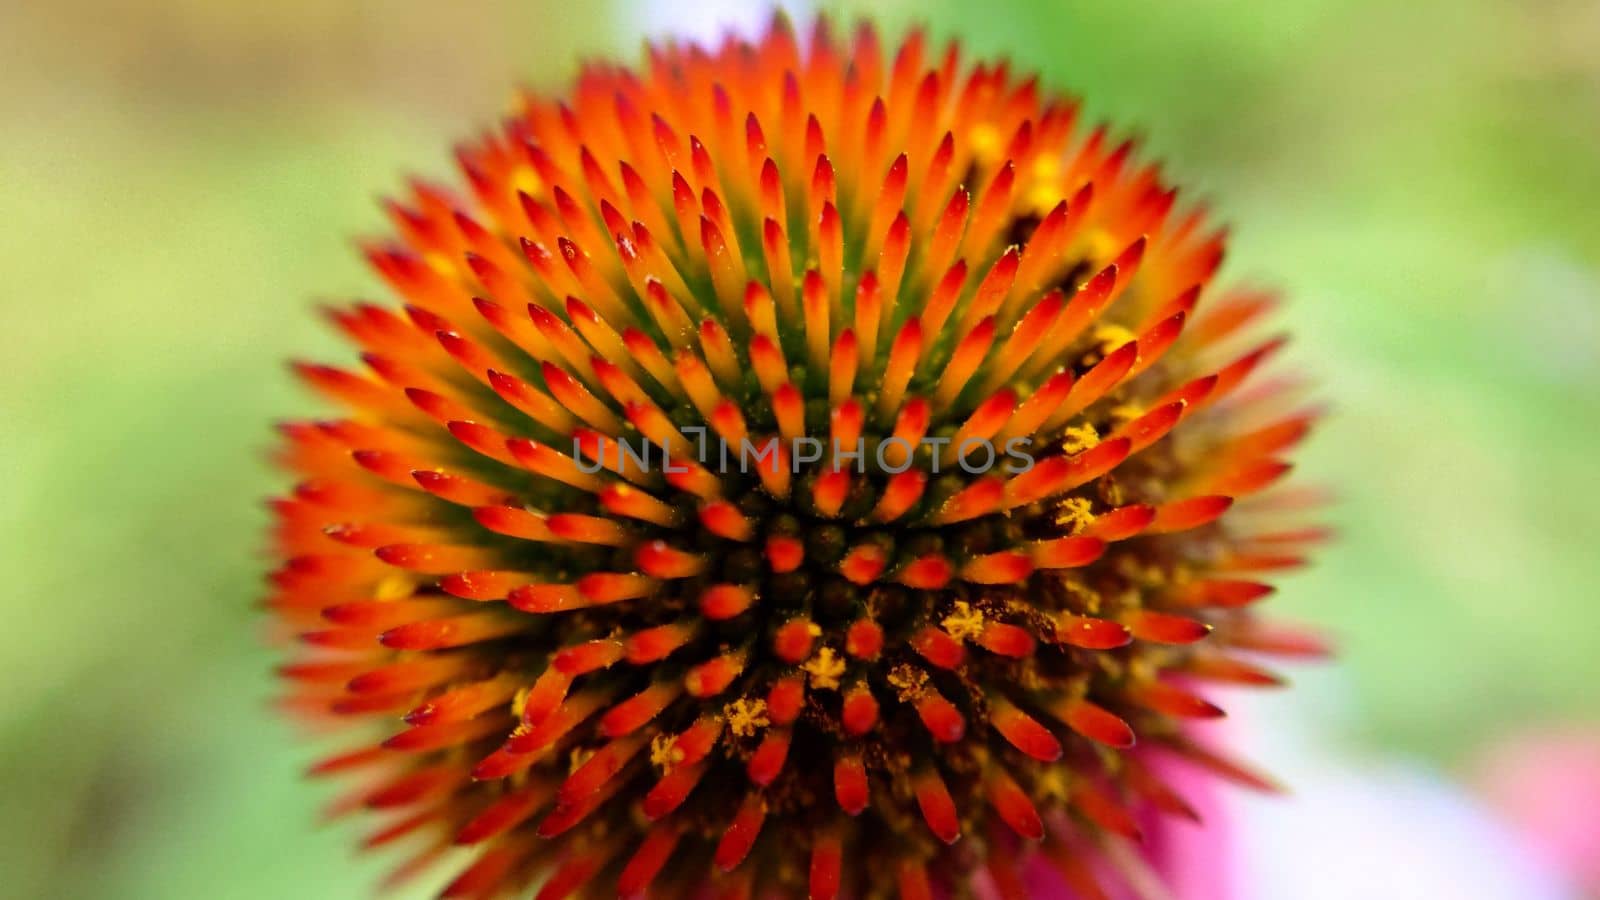 A single pink echinacea flower with a prickly head close-up.Macrophotography.Texture or background.Selective focus.